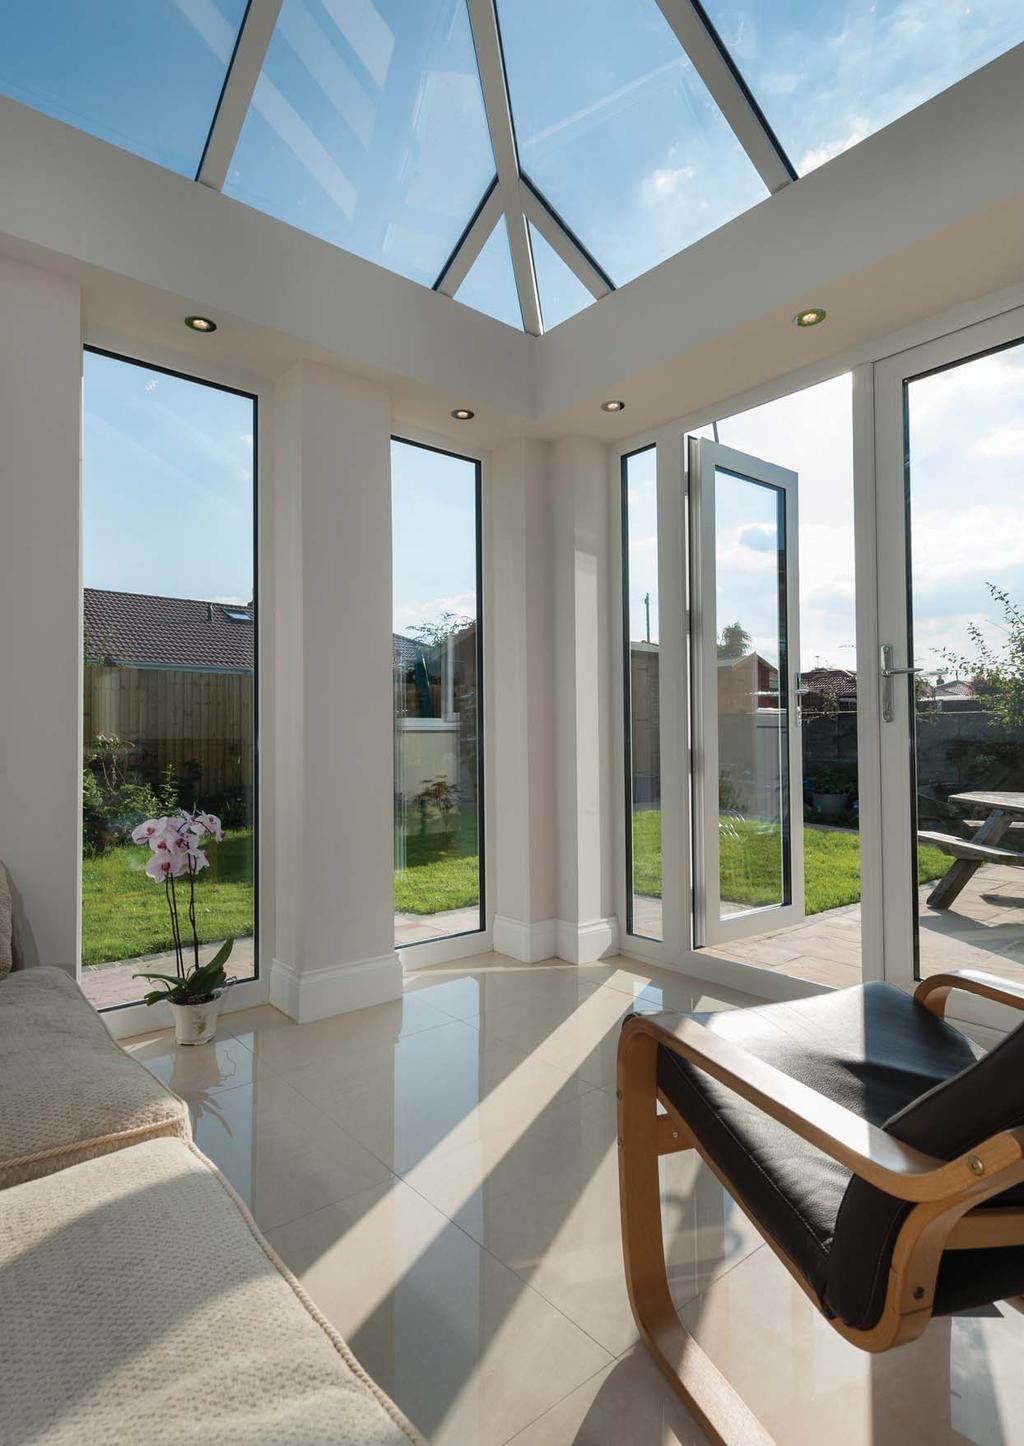 The UltraSky orangery system features a full glass roof, with a cornice externally and the plastered pelmet system internally.